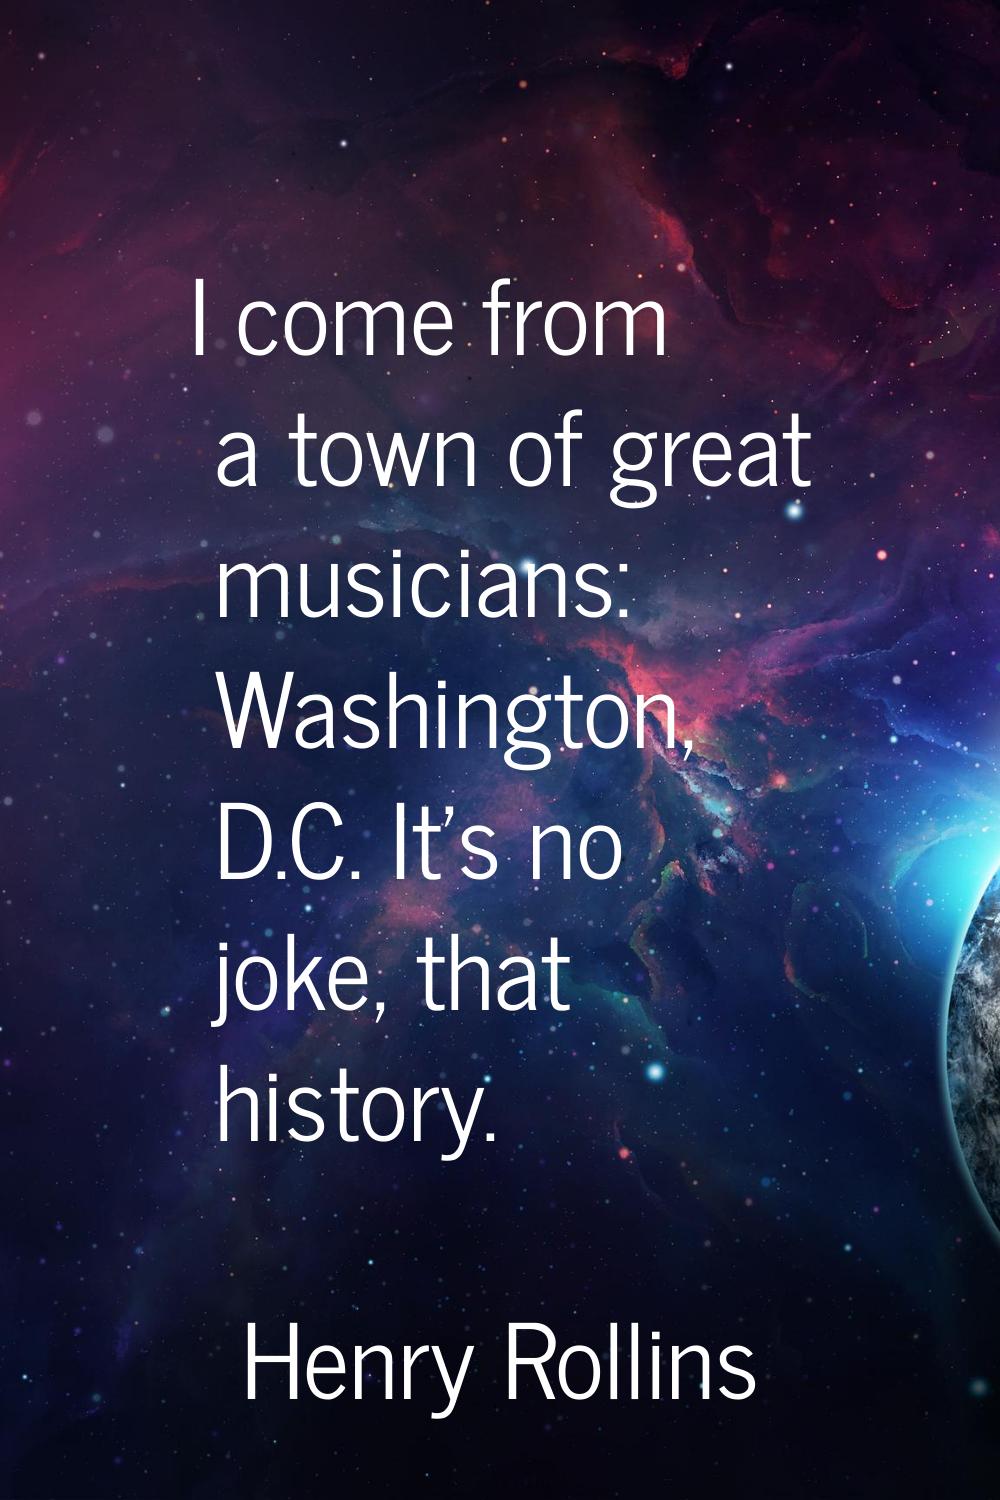 I come from a town of great musicians: Washington, D.C. It's no joke, that history.